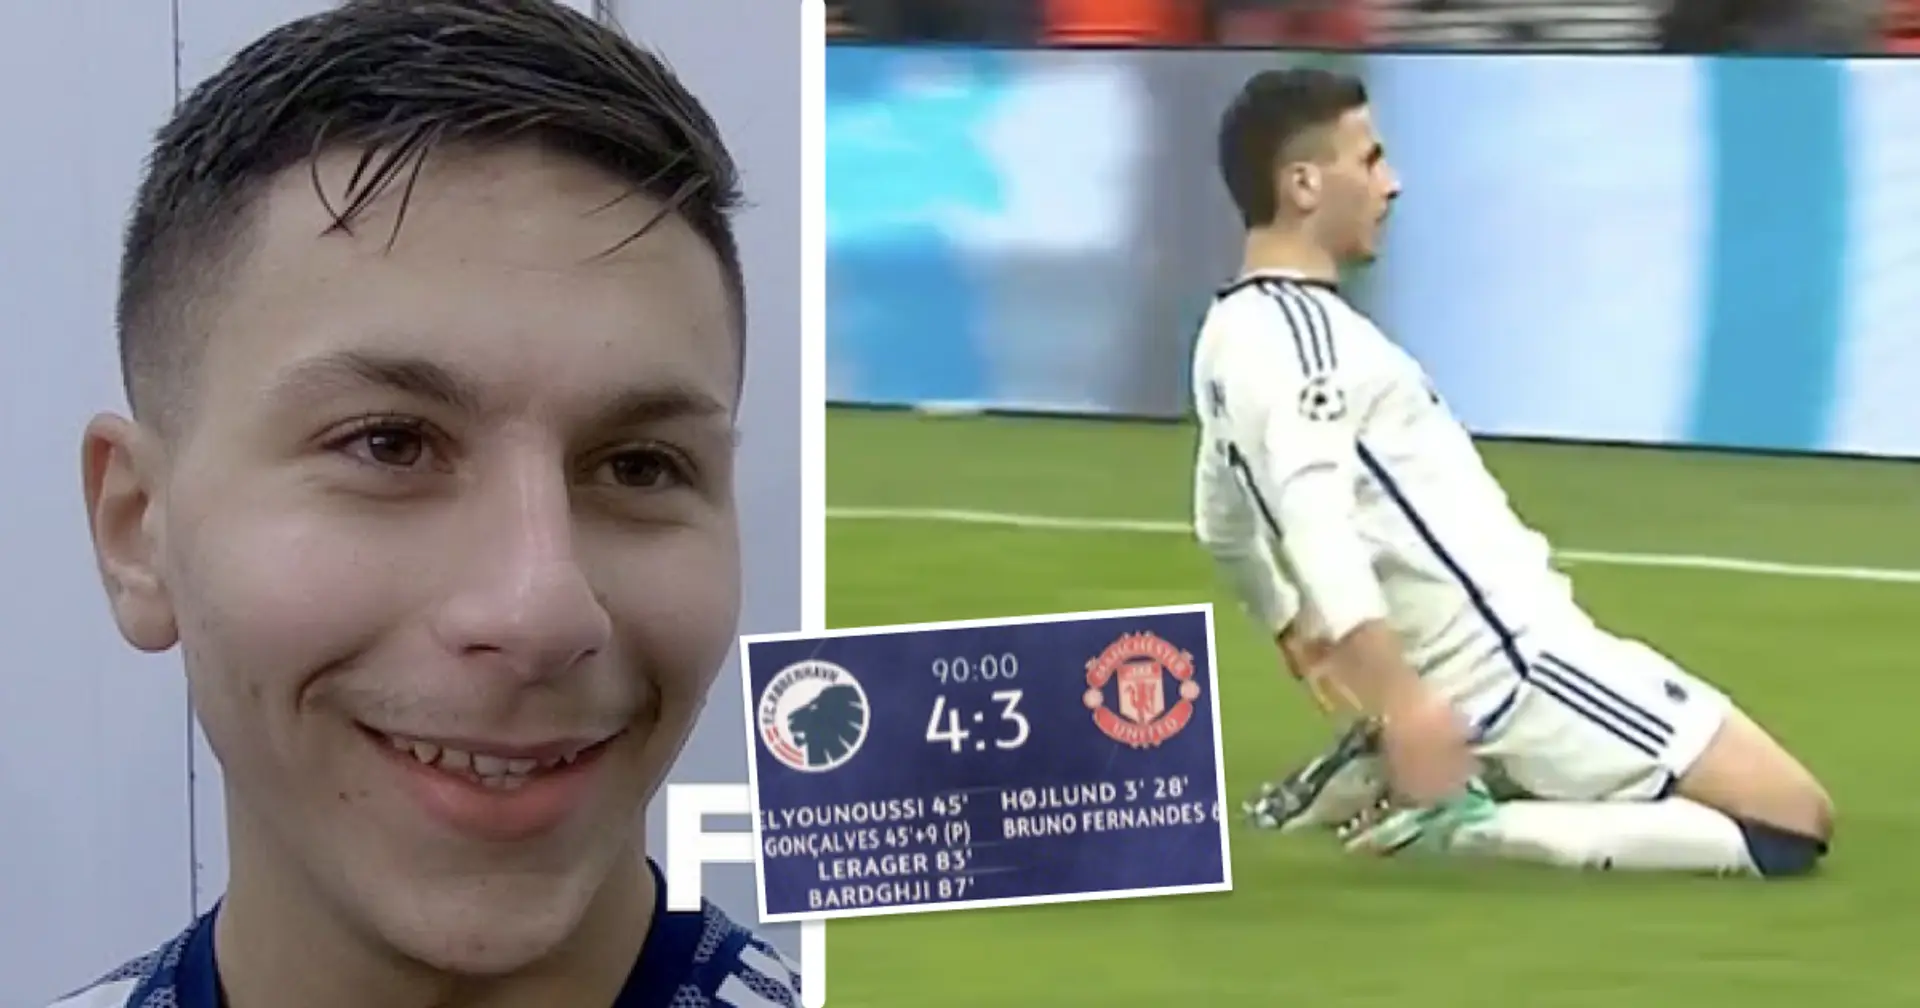 17-year-old forward hits winner v Man United in Champions League – he once said he'd like to play for Real Madrid